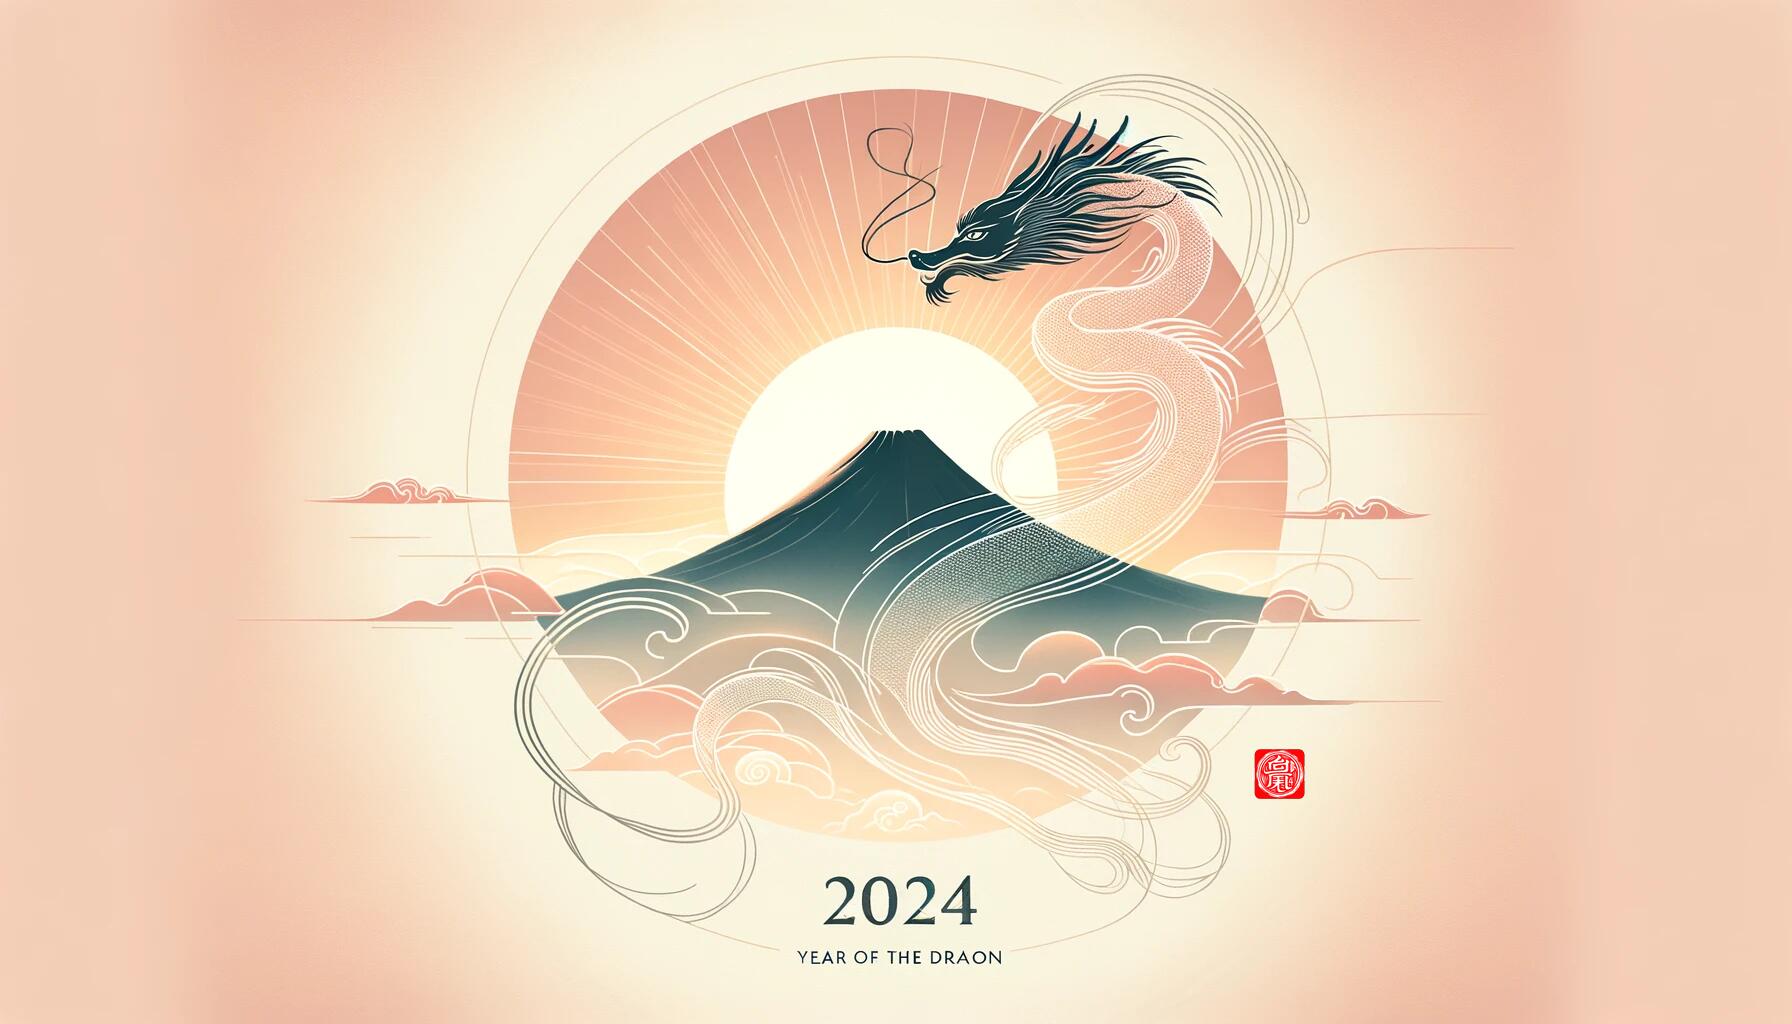 A HAPPY NEW YEAR 2024